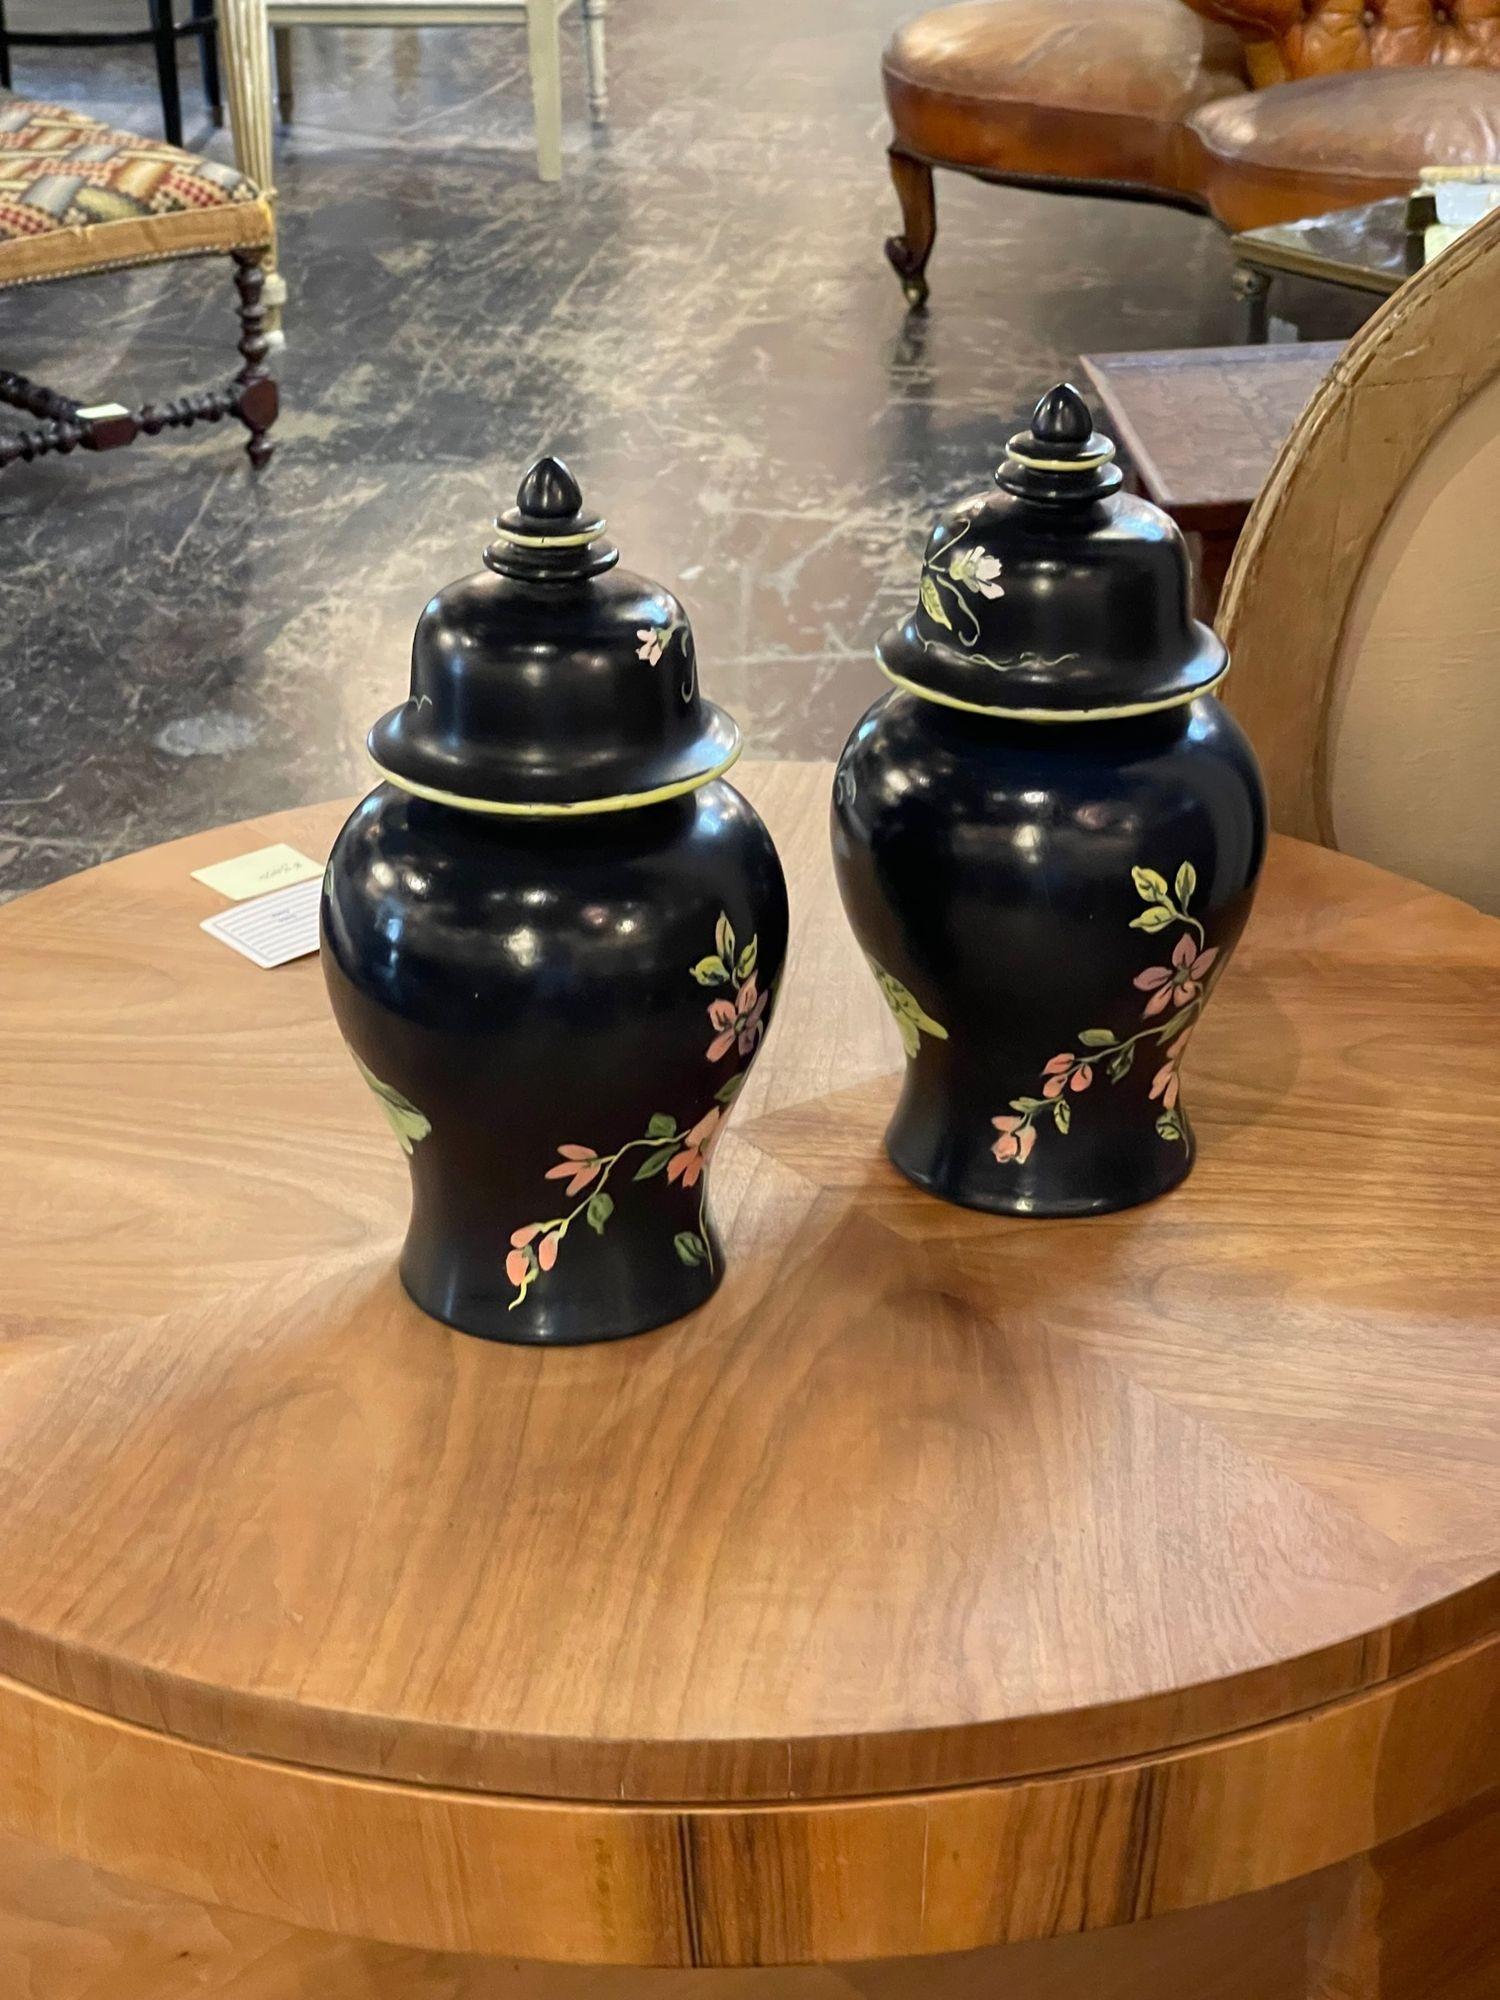 Pair of Italian Decorative Porcelain Vases For Sale at 1stDibs